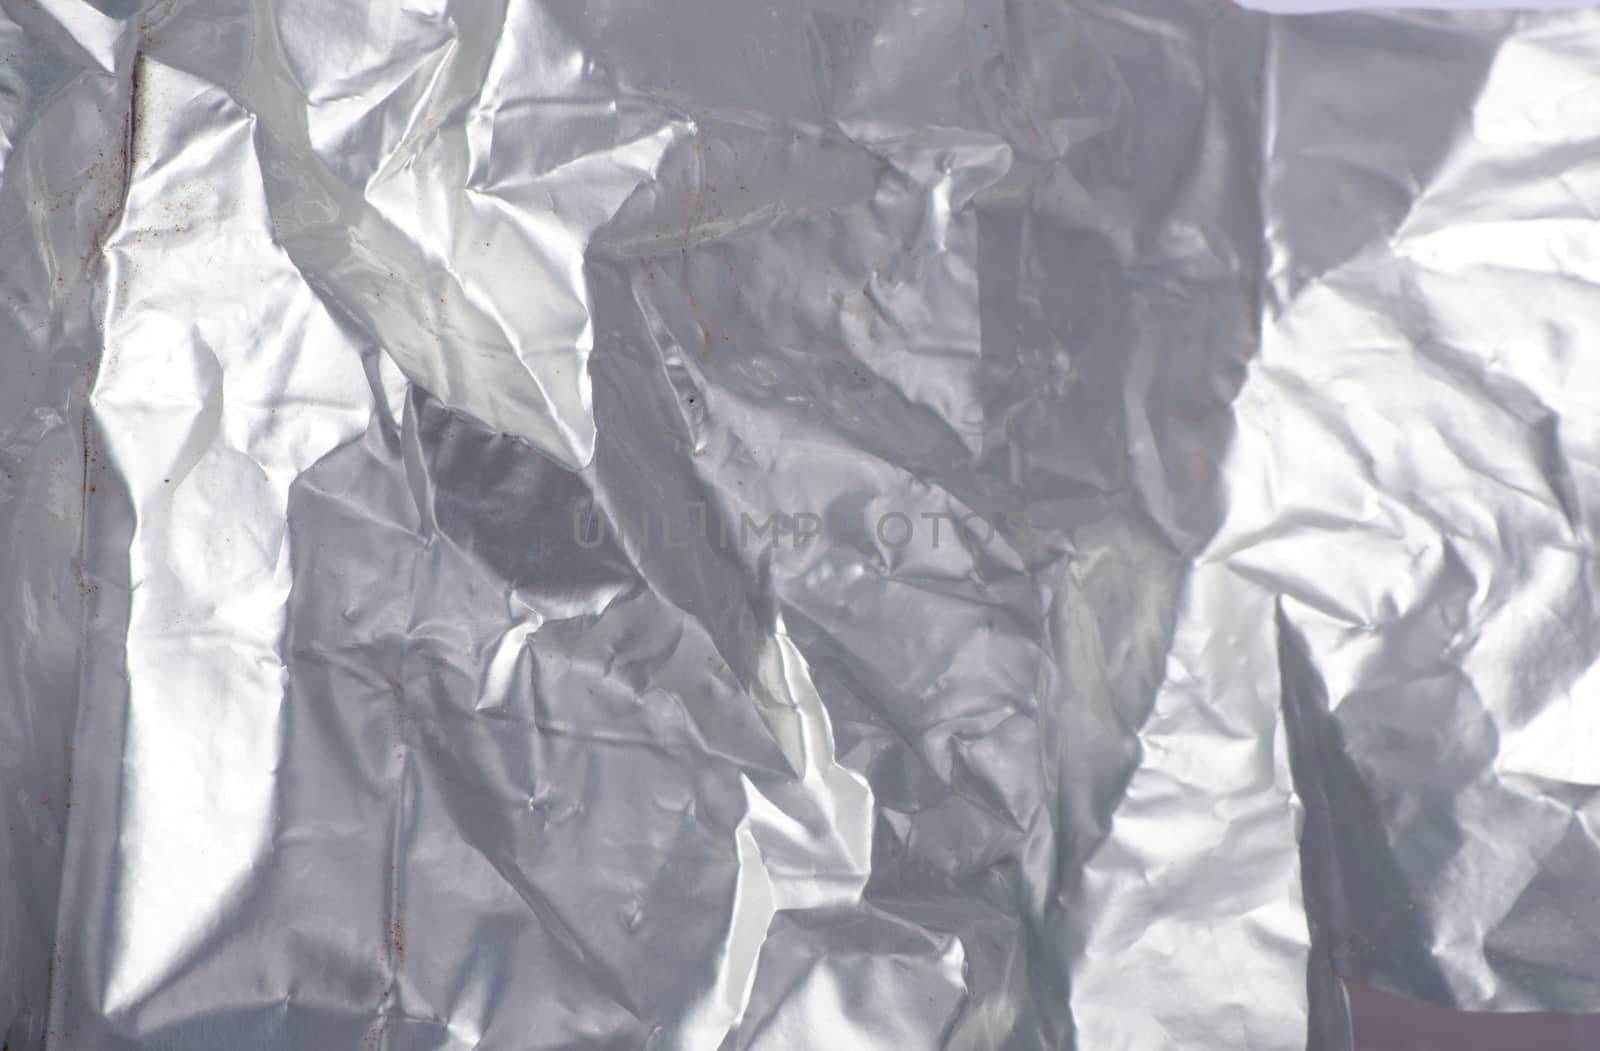 crumpled foil by sarkao